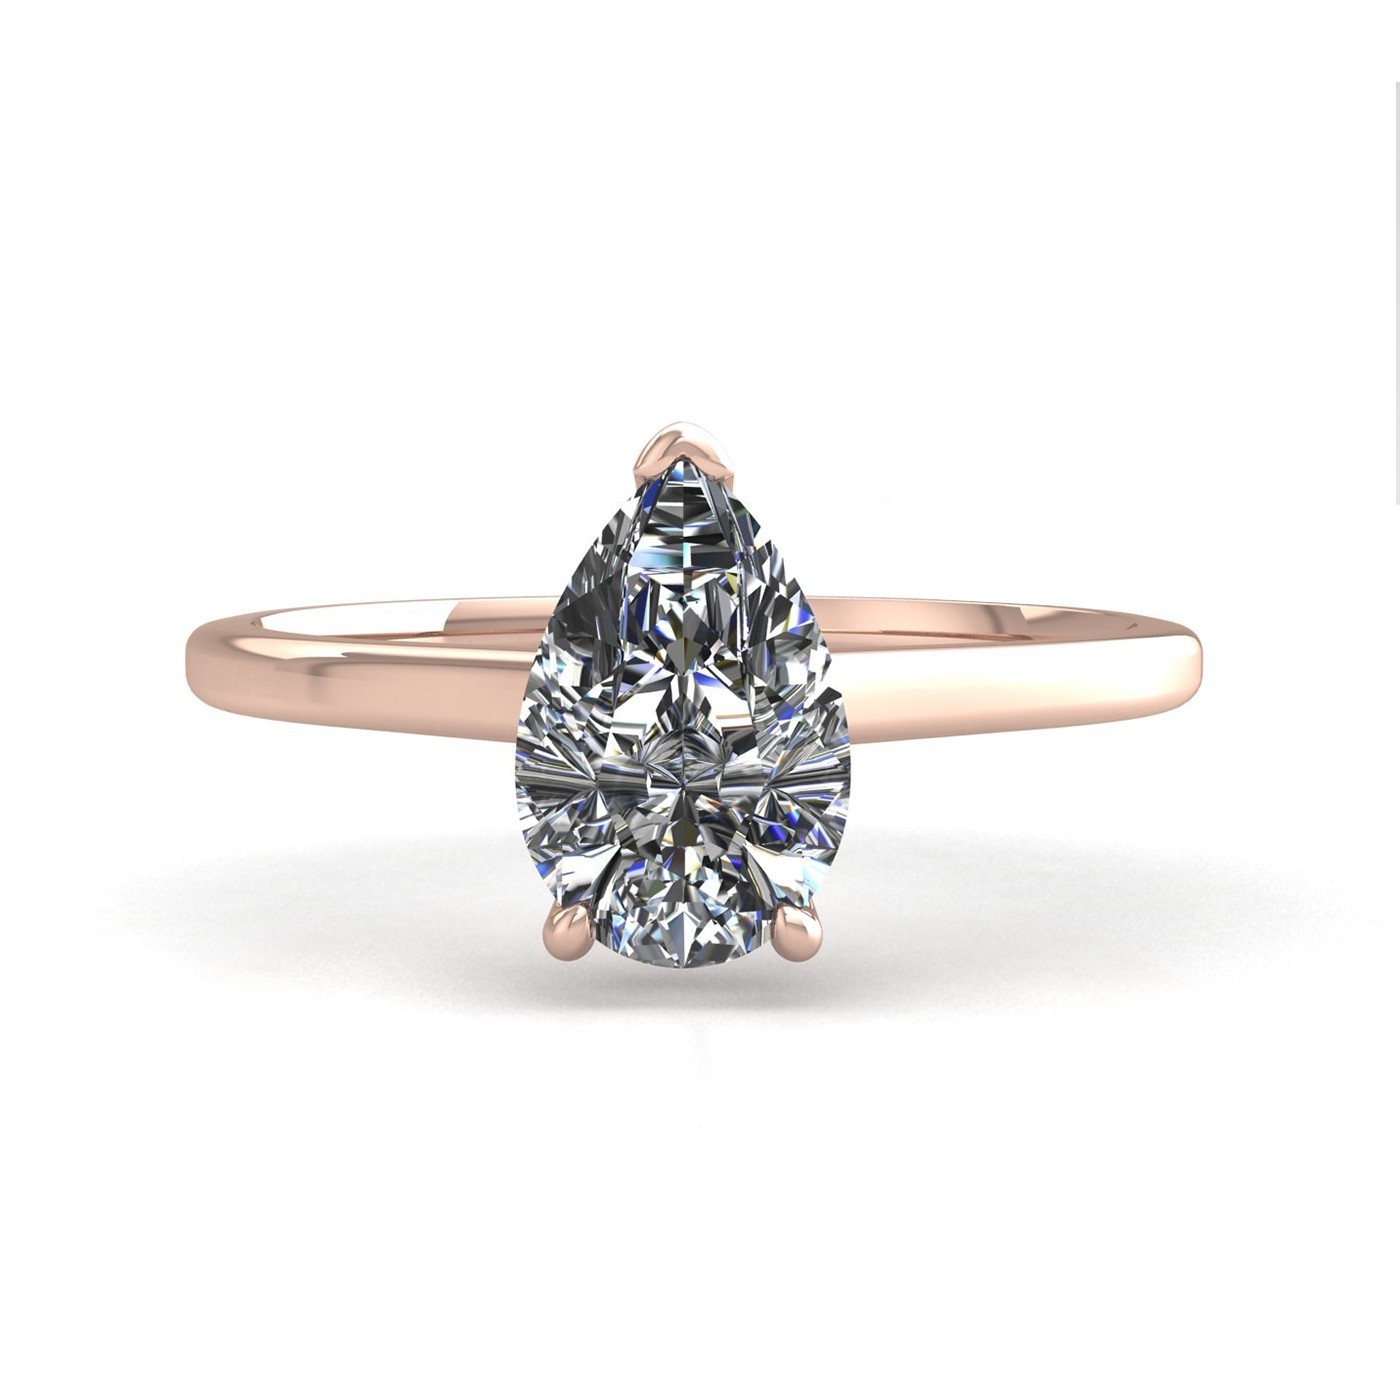 18k rose gold  1,00 ct 3 prongs solitaire pear cut diamond engagement ring with whisper thin band